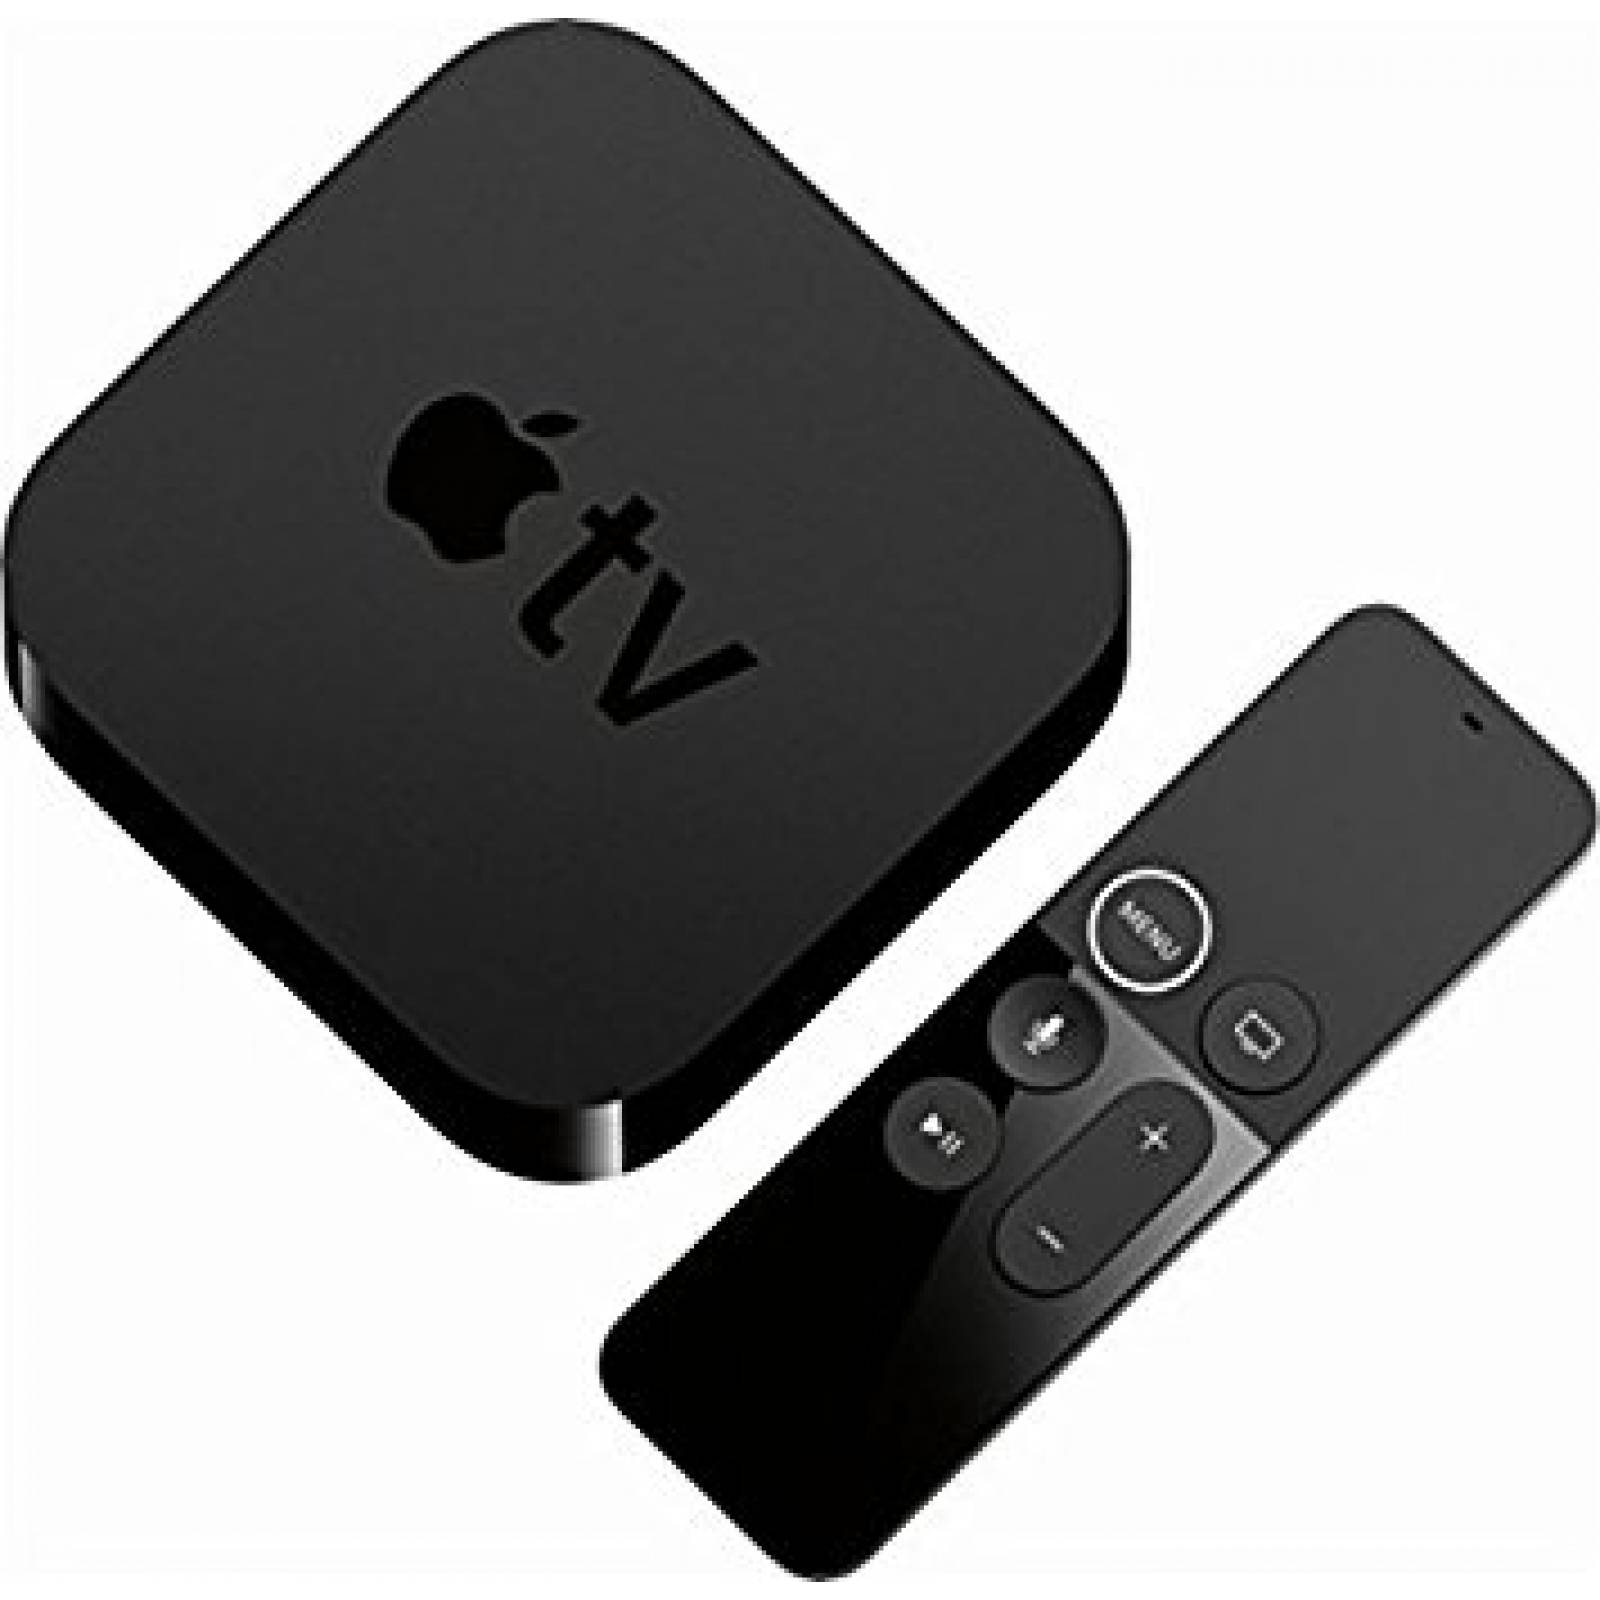 Reproductor Tv Apple Tv 4k 32gb Streaming Smart A10x 4a Gen